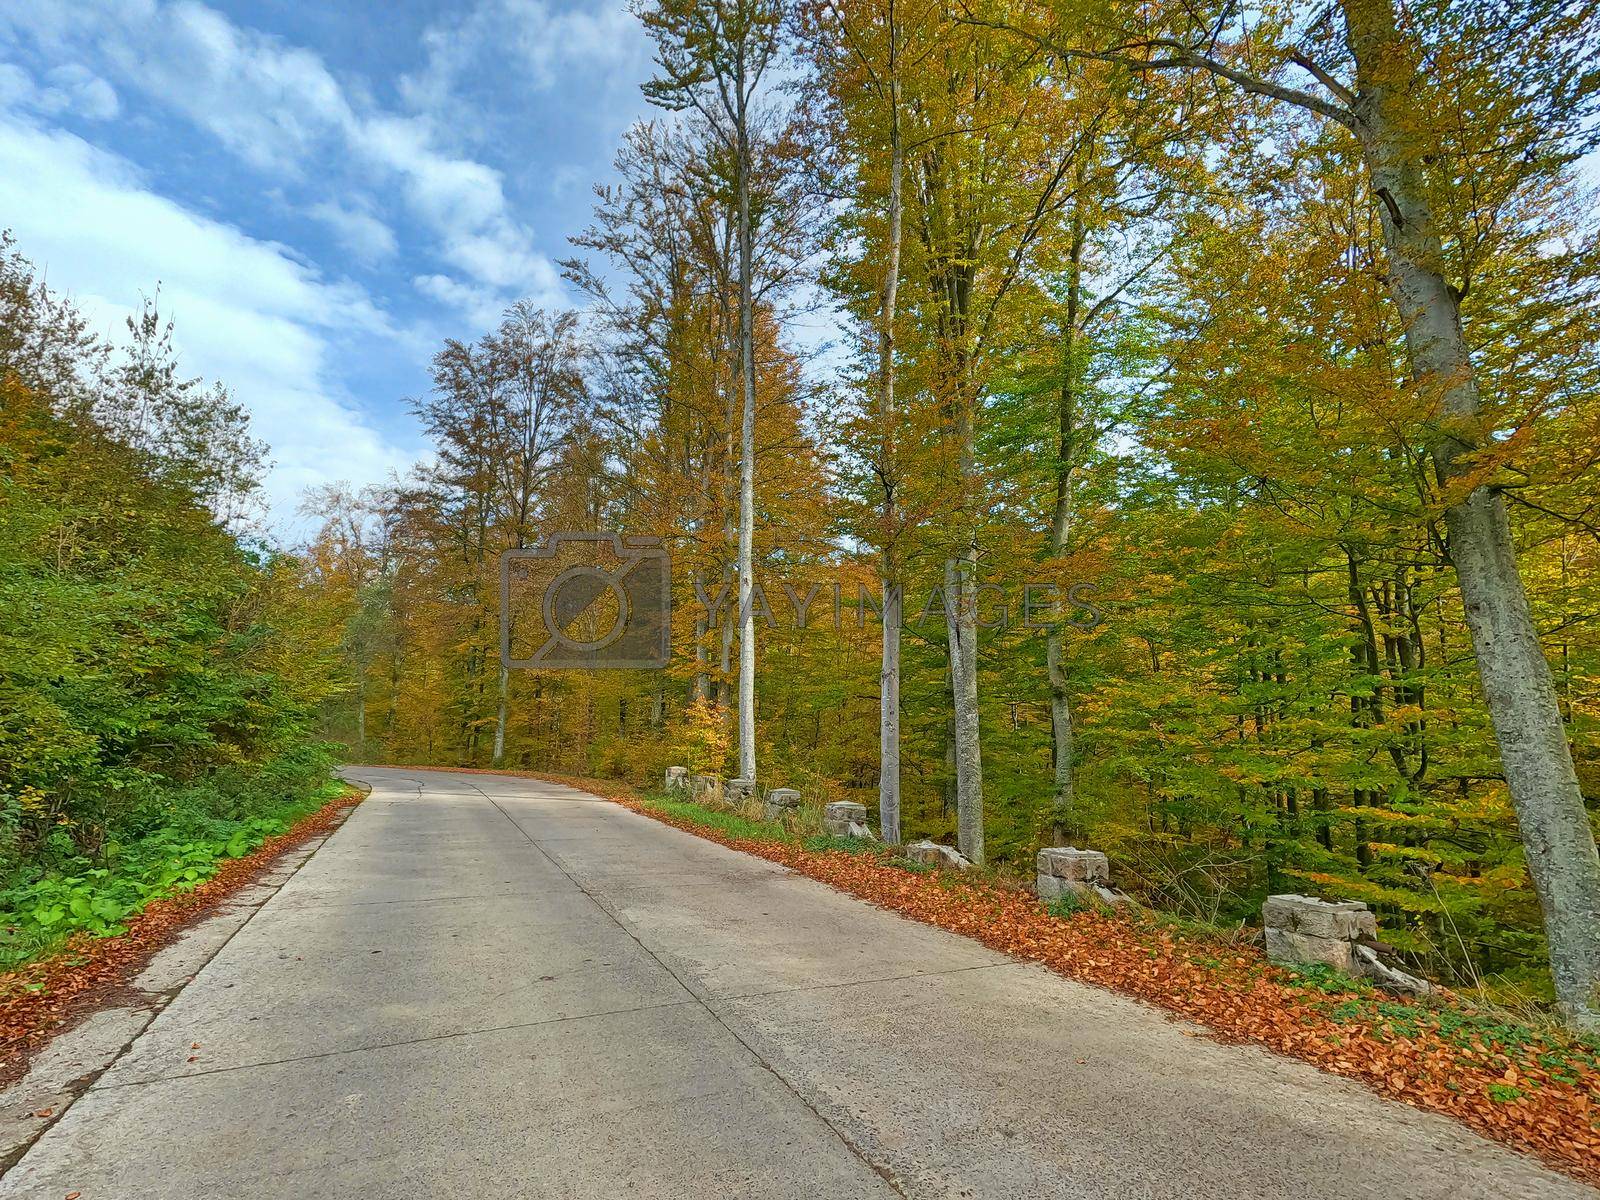 Curvy road in autumn forest, colored foliage border